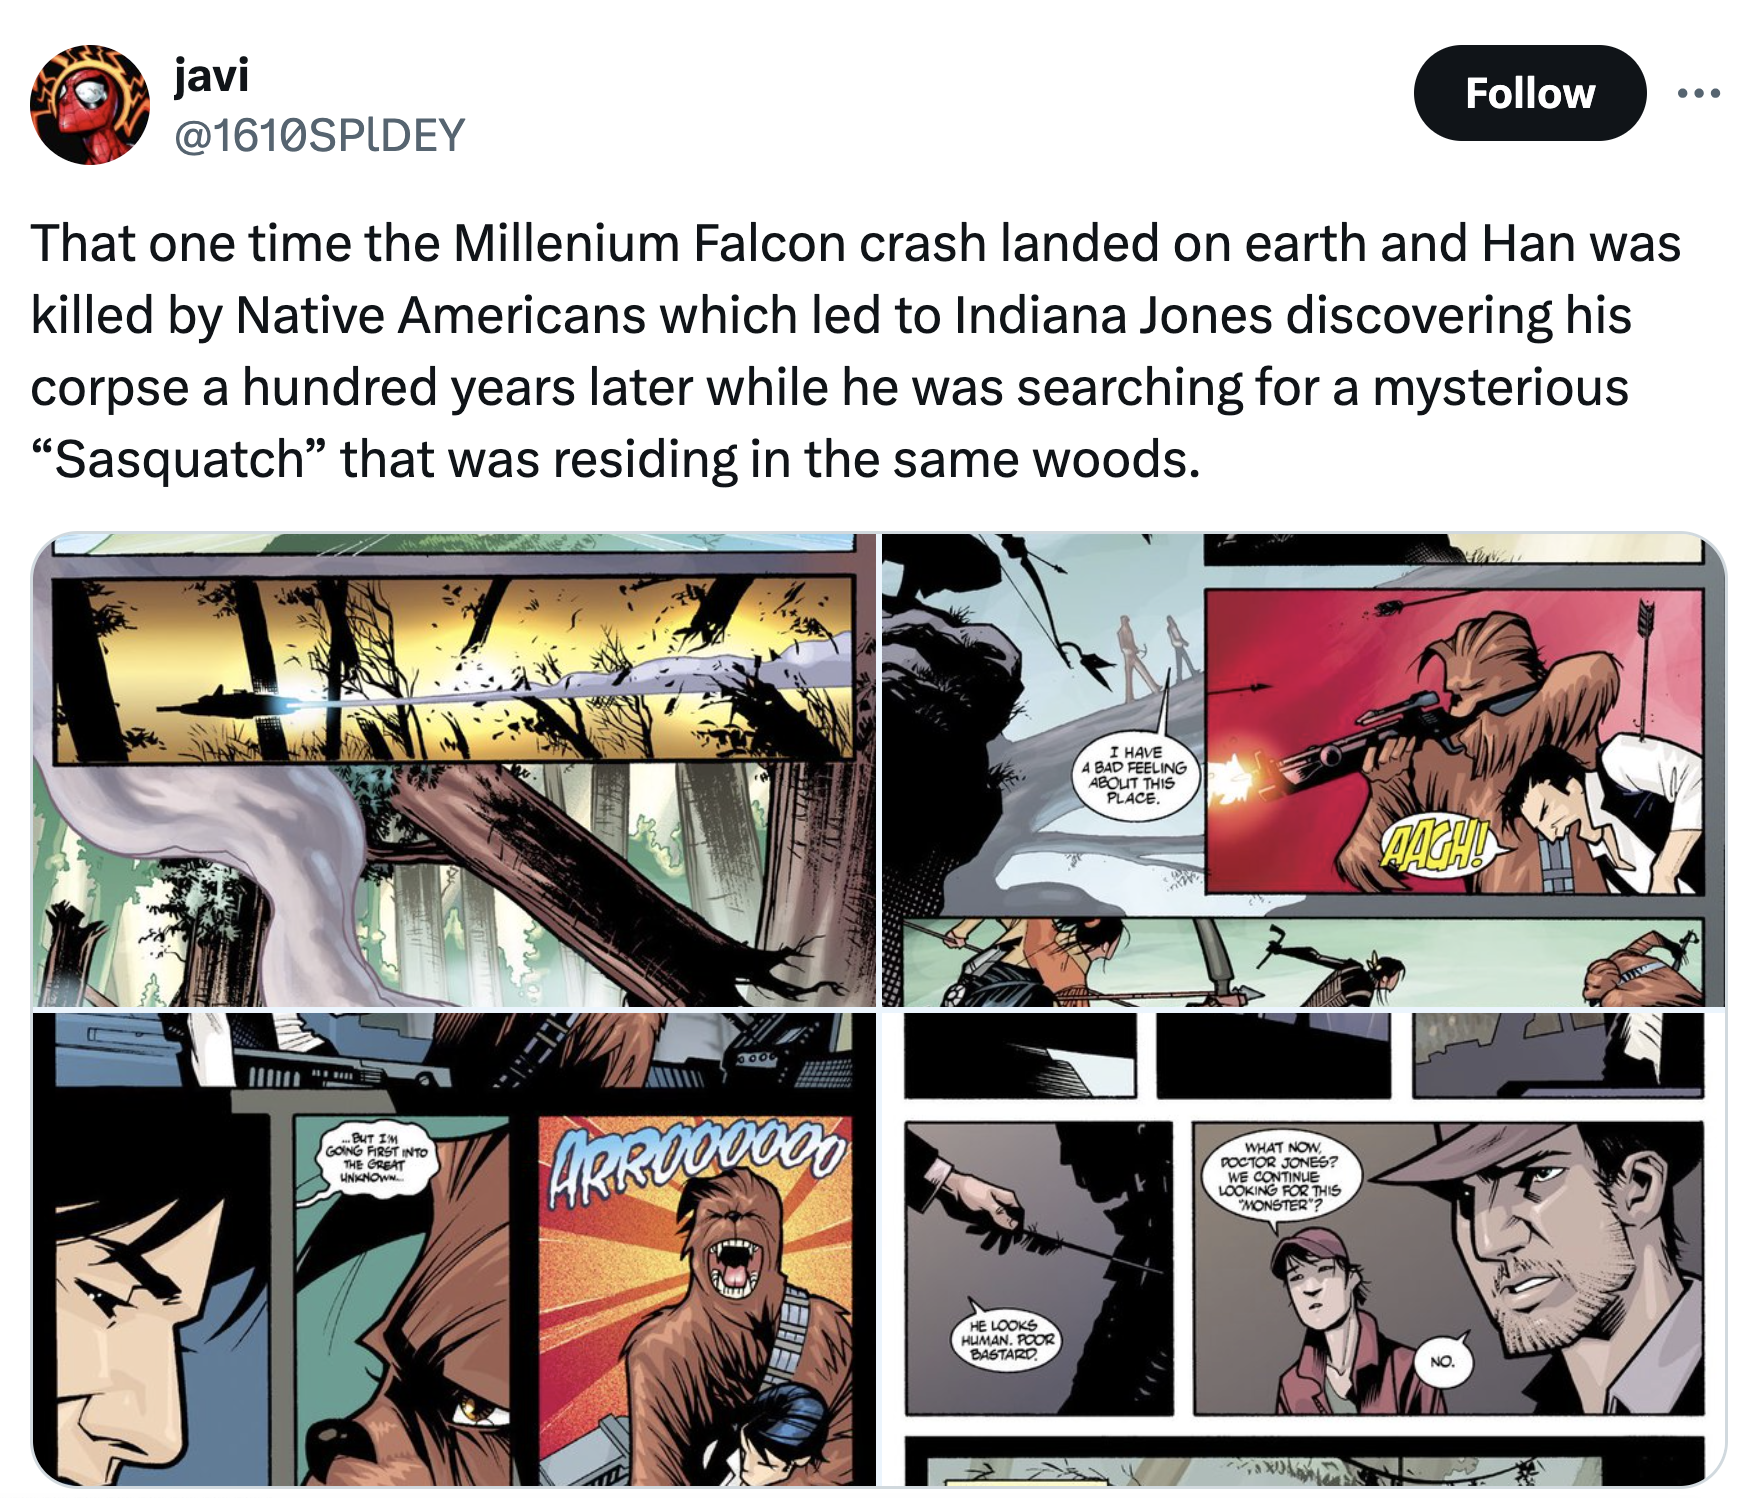 comics - javi That one time the Millenium Falcon crash landed on earth and Han was killed by Native Americans which led to Indiana Jones discovering his corpse a hundred years later while he was searching for a mysterious "Sasquatch" that was residing in 